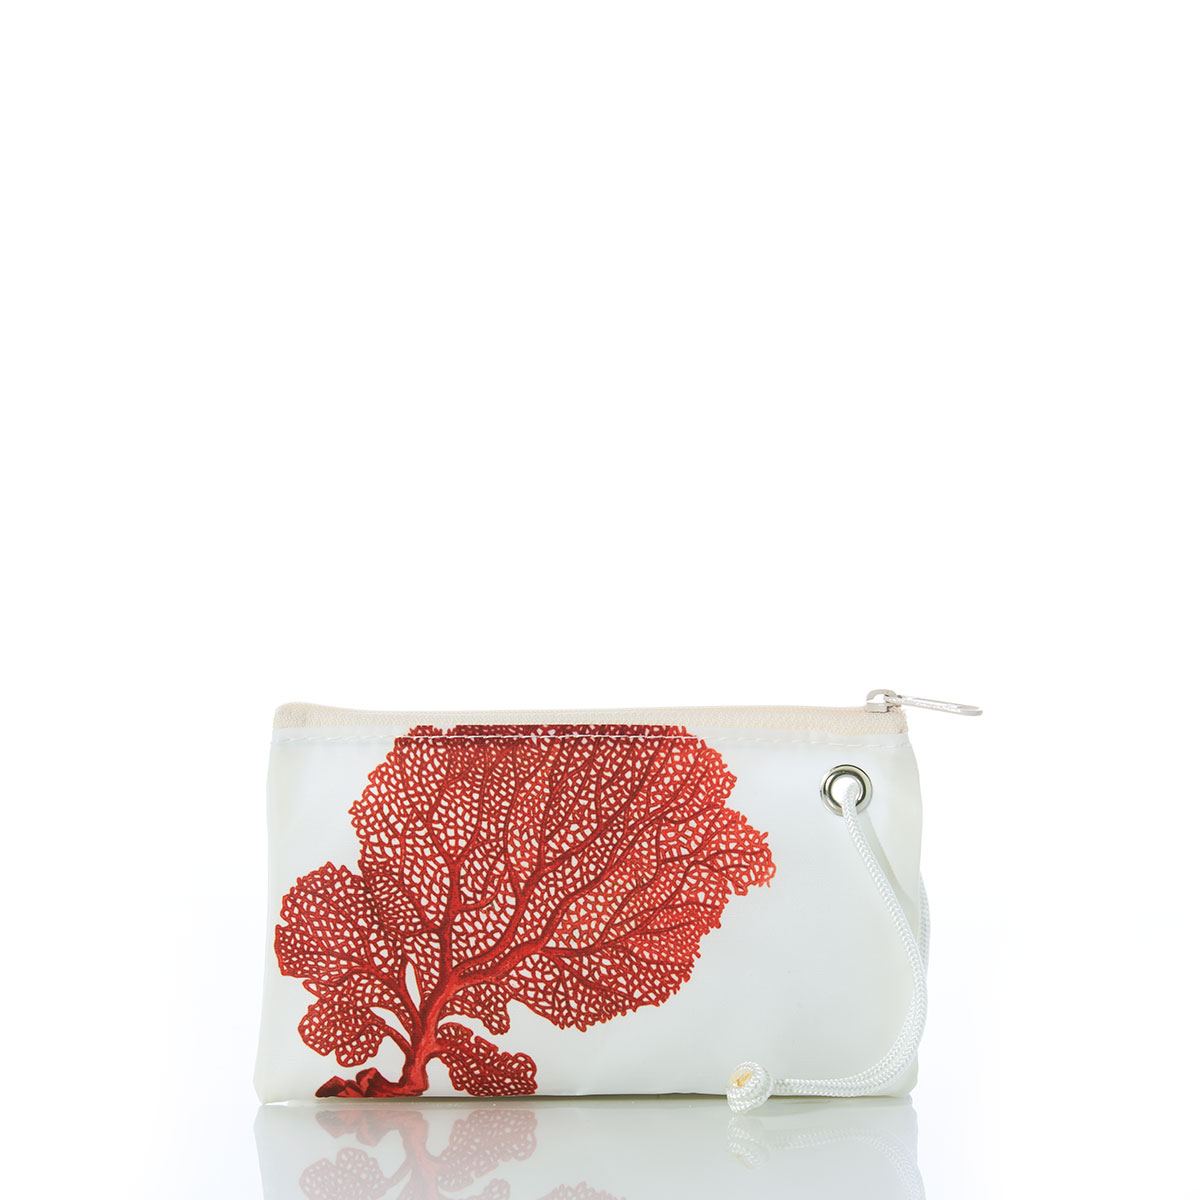 red coral reef print on white recycled sail cloth wristlet with white zipper and wristlet strap